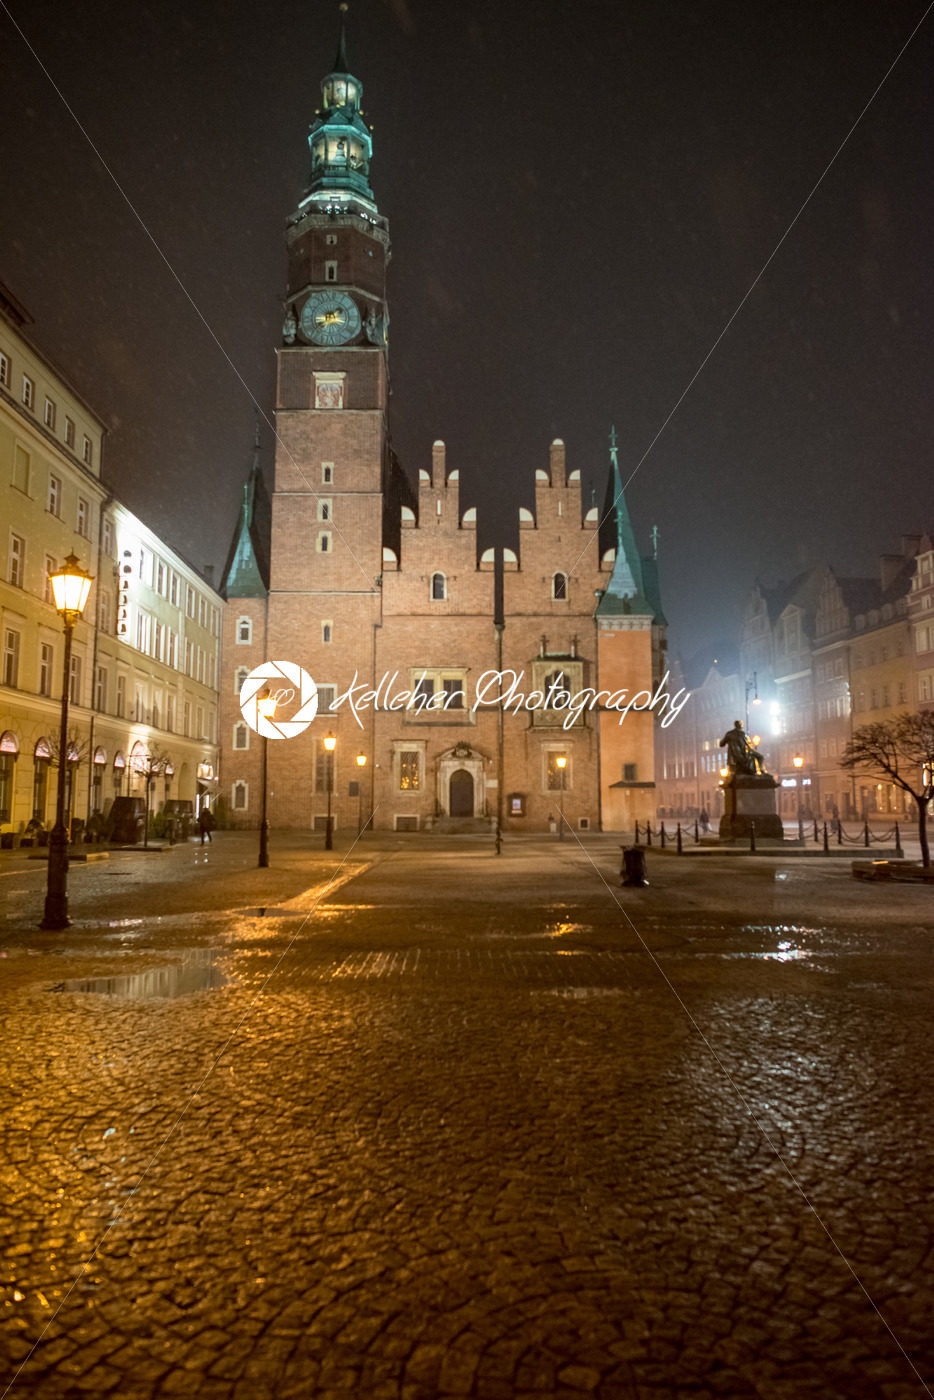 Wroclaw, Poland – March 6, 2018: Wroclaw Town Hall at night in historic capital of Silesia, Poland, Europe. - Kelleher Photography Store